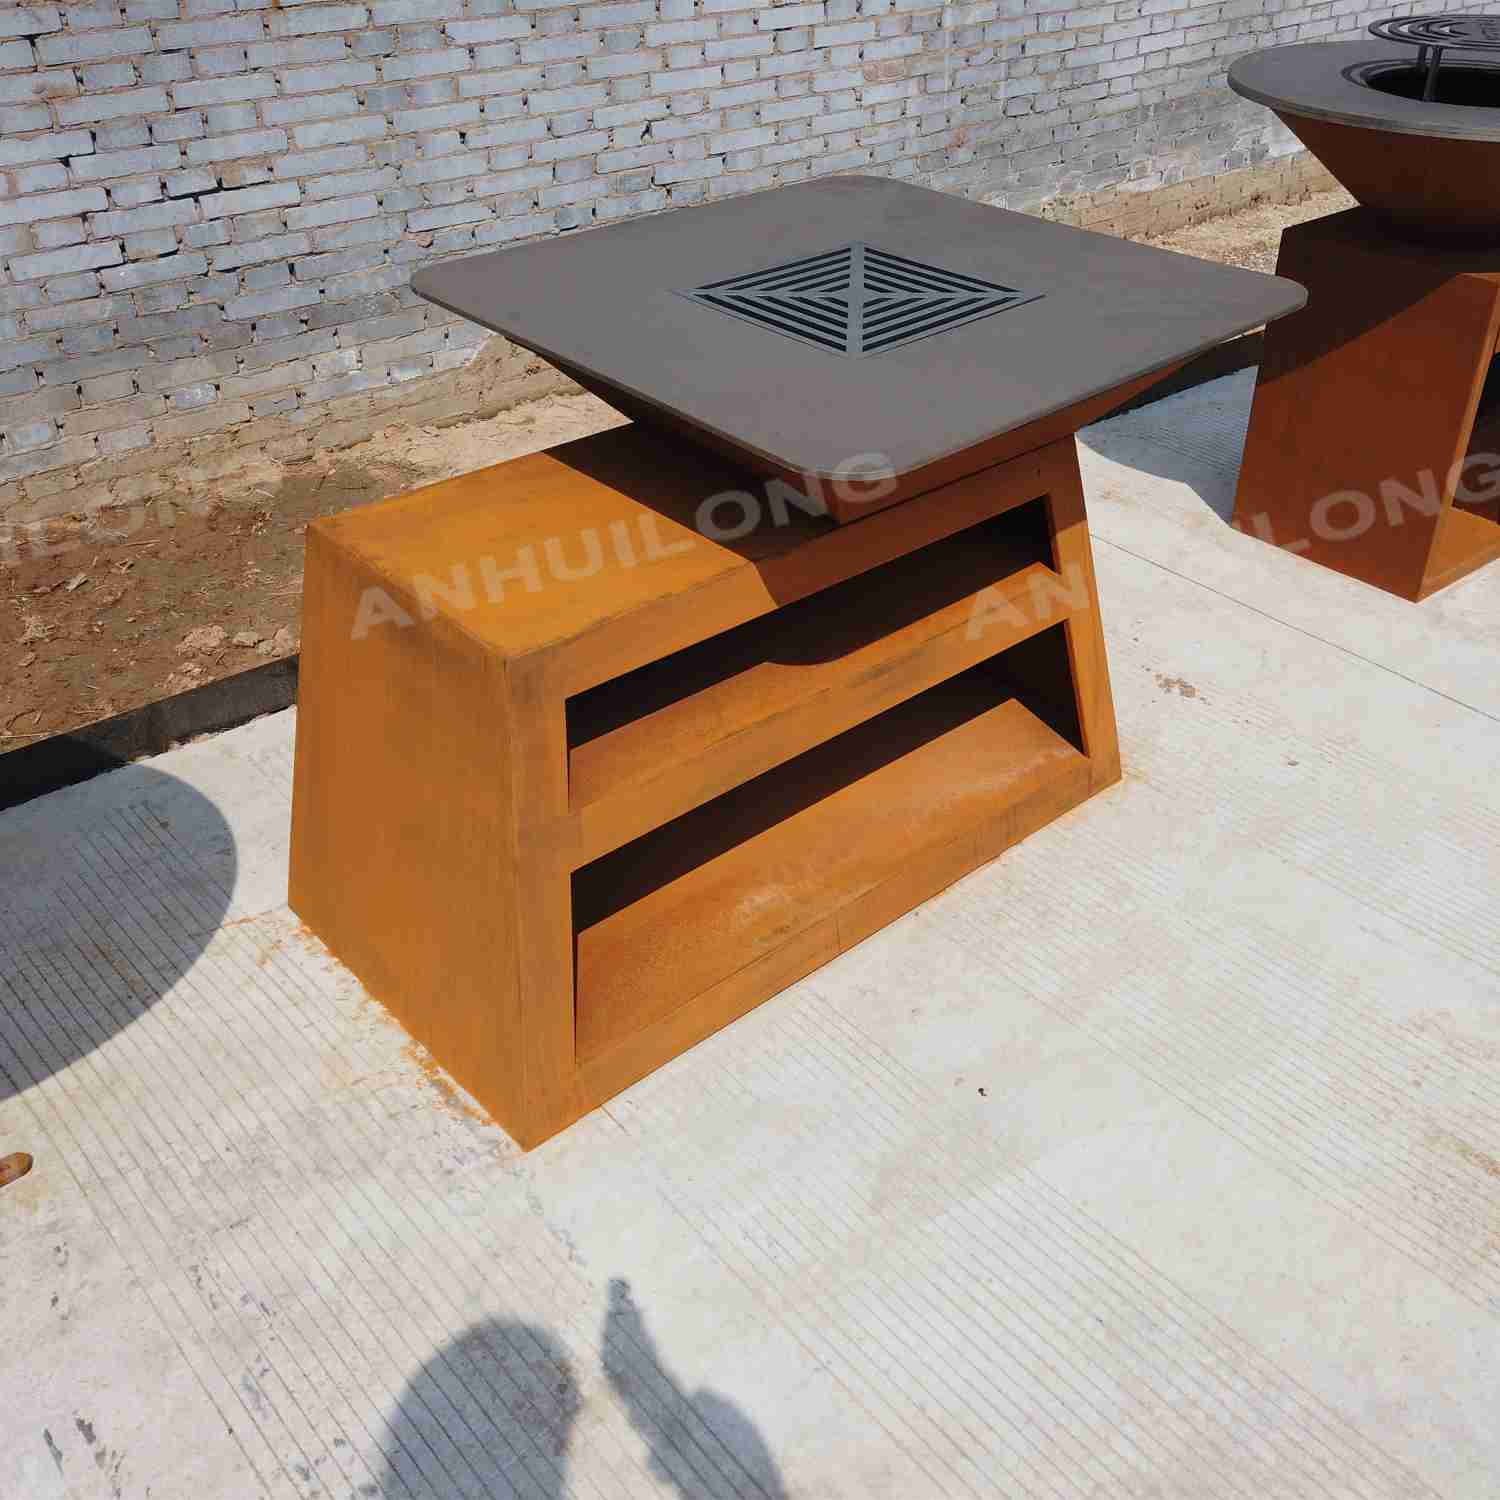 Durable and Stylish Corten BBQ Perfect for Entertaining Outdoors  Rustic Charcoal Grill for Outdoor Cooking